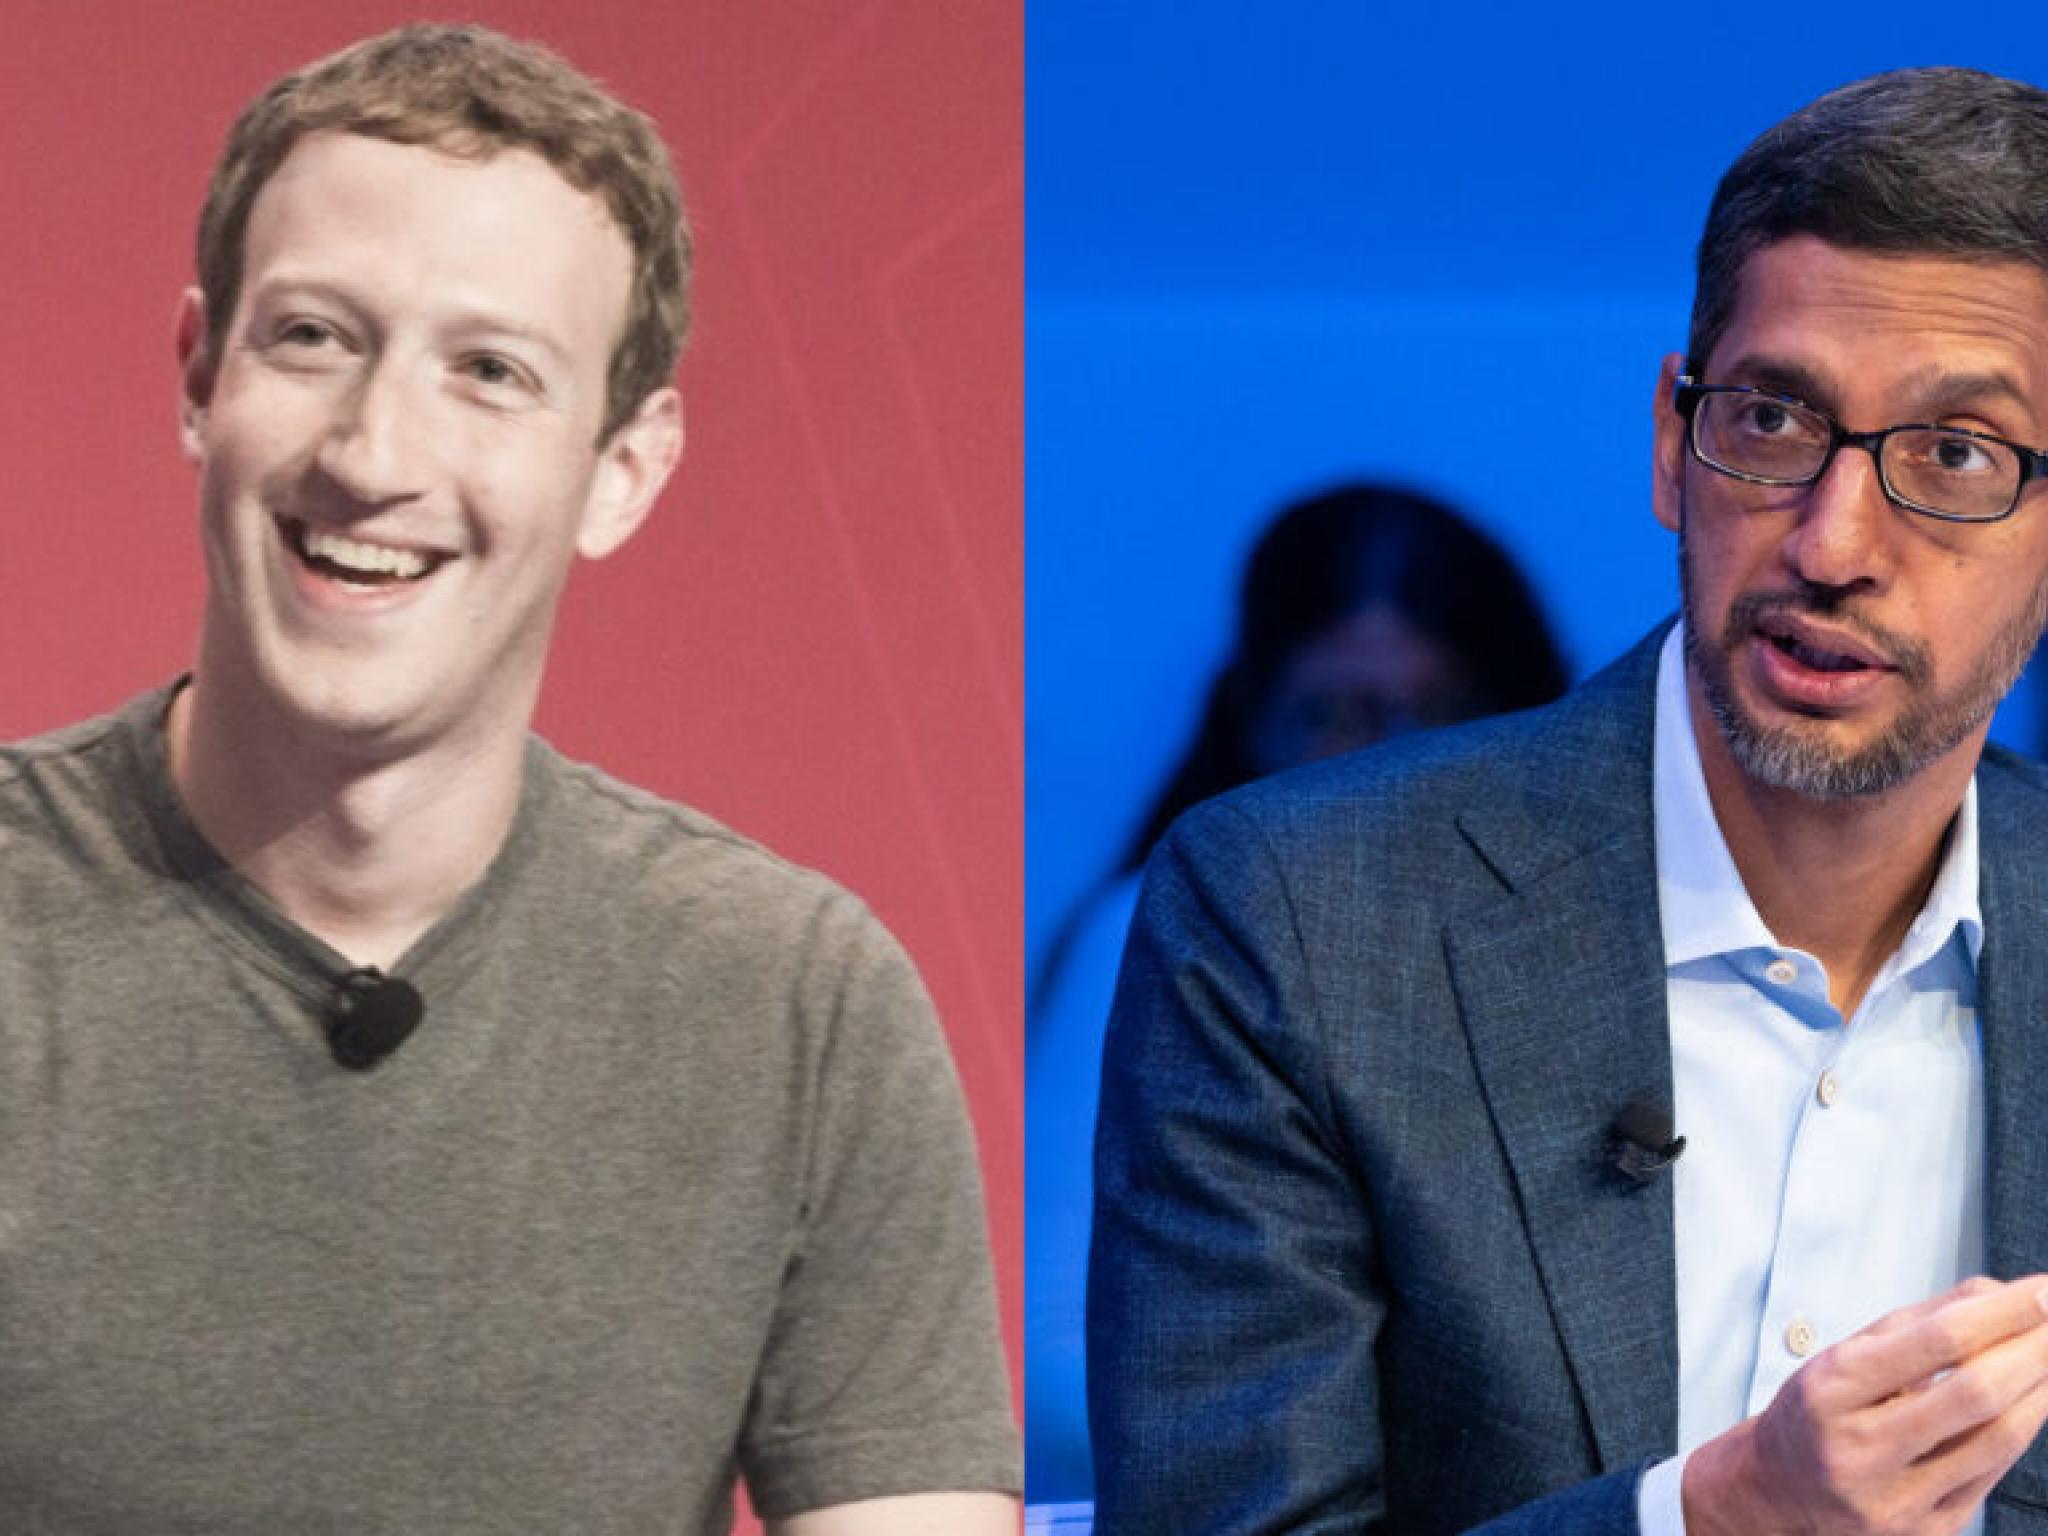  microsoft-and-oracle-could-be-tiktoks-likely-buyers-but-real-winners-would-be-mark-zuckerberg-and-sundar-pichai 